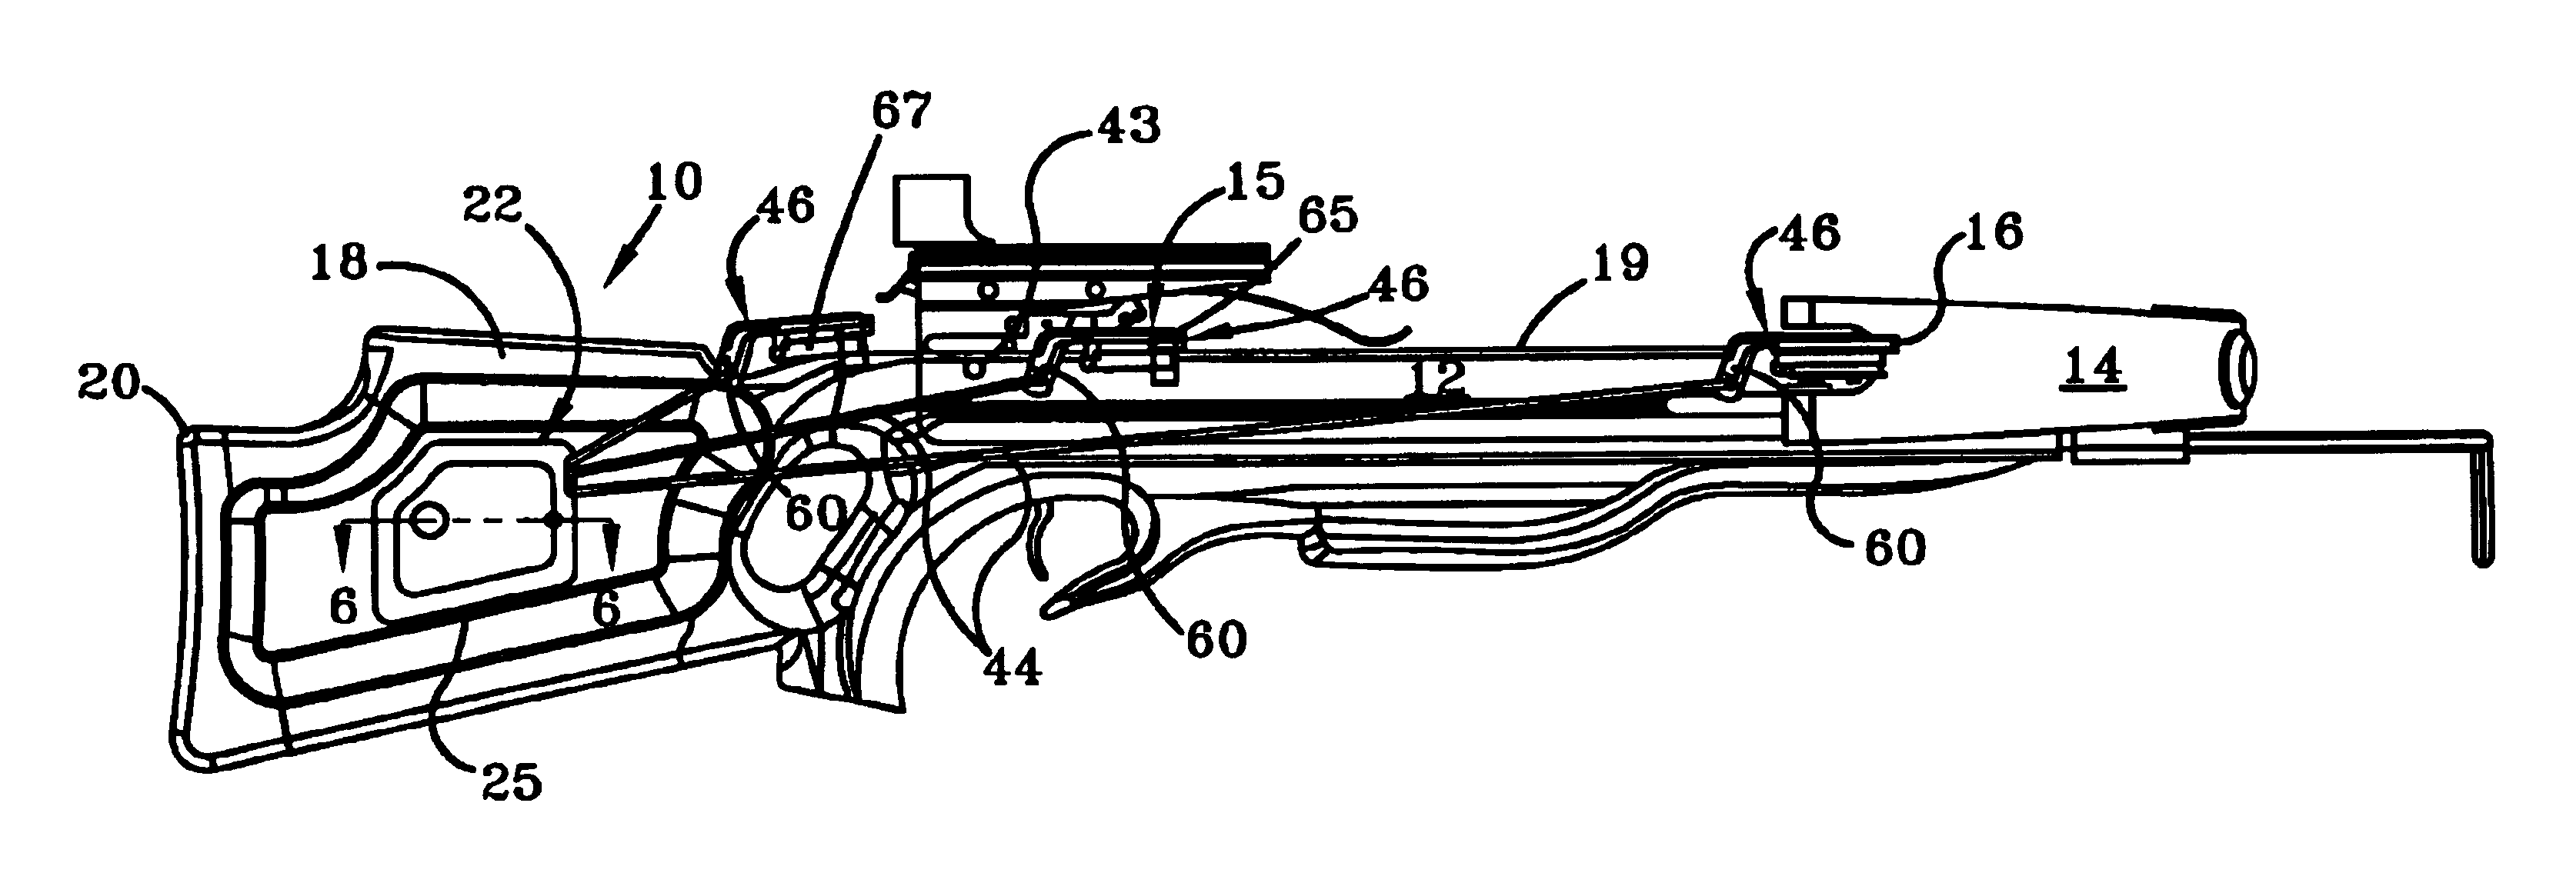 Crossbow bowstring drawing mechanism